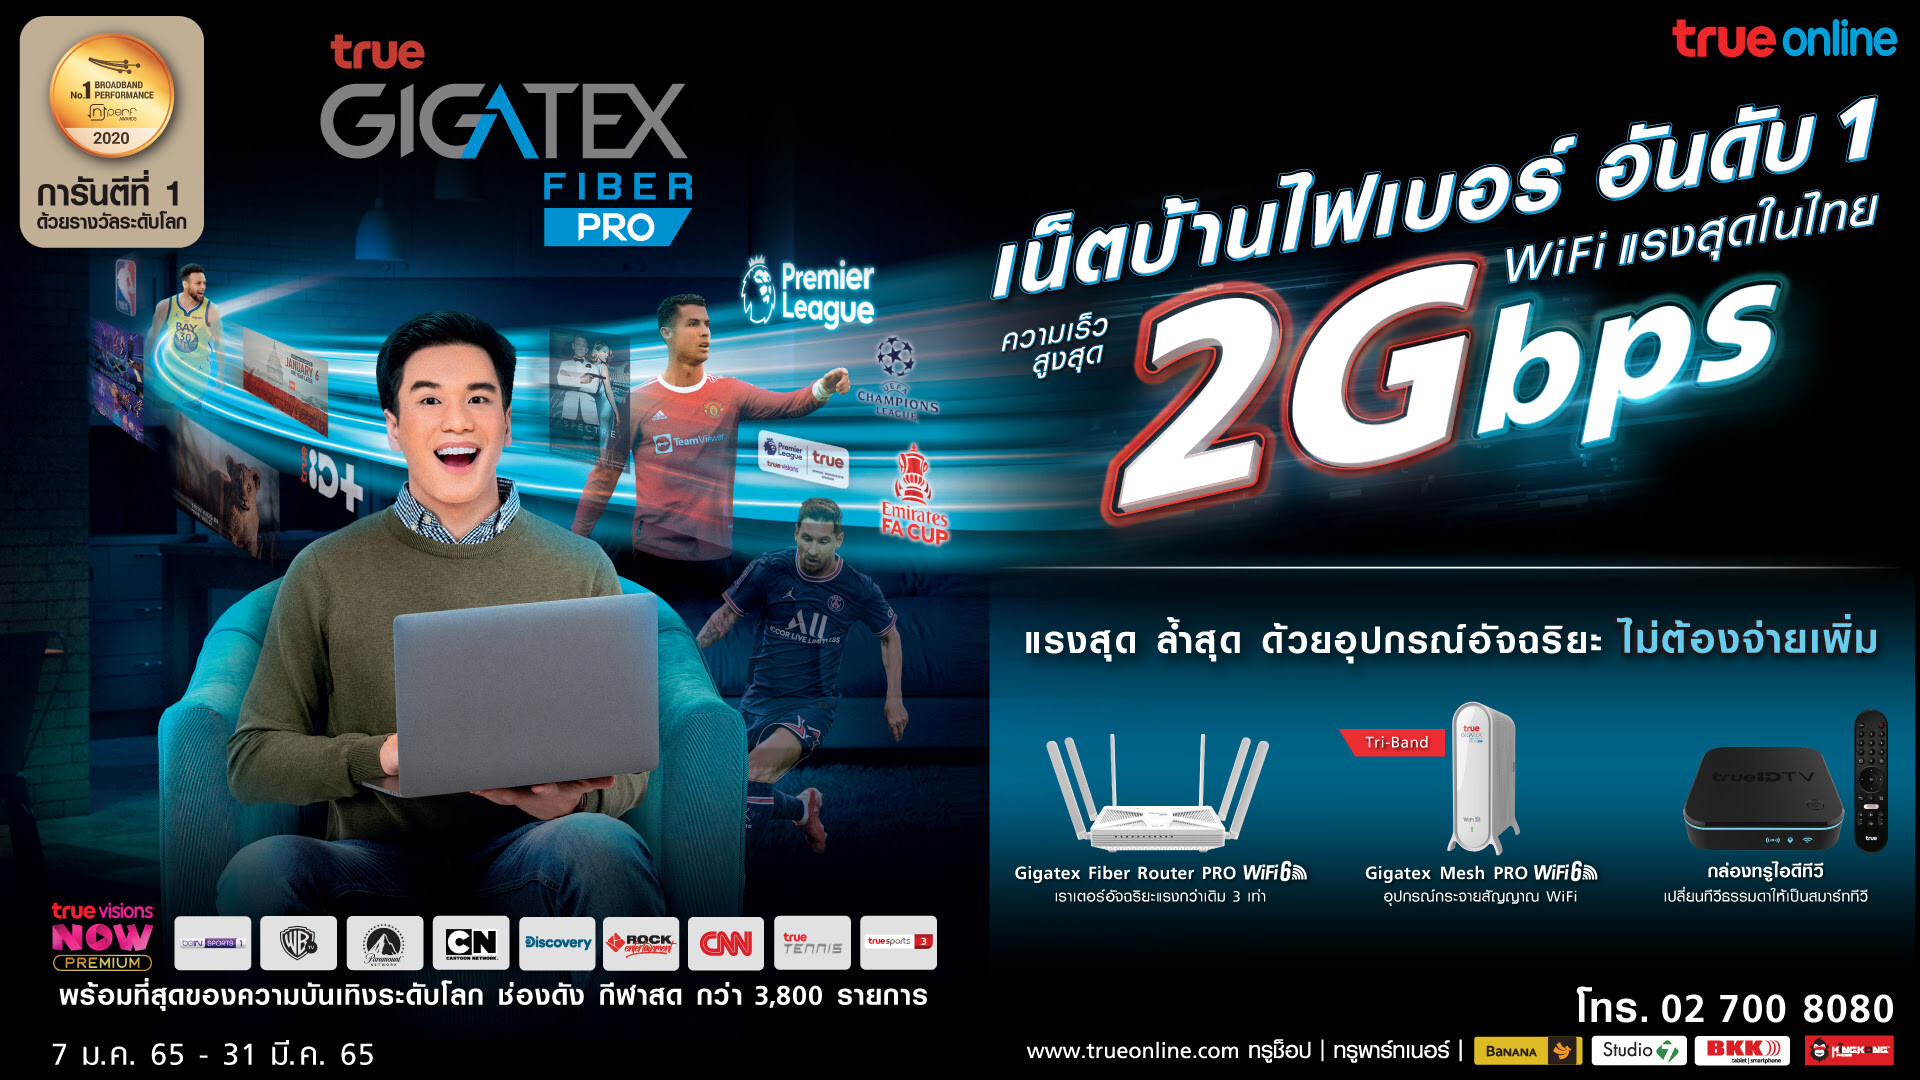 True Online reinforces its No. 1 position in home fiber internet, guaranteed by nPerf's world-class award, unveiling the "True Gigatex Fiber 2 Gbps" package offering the fastest Wi-Fi in Thailand